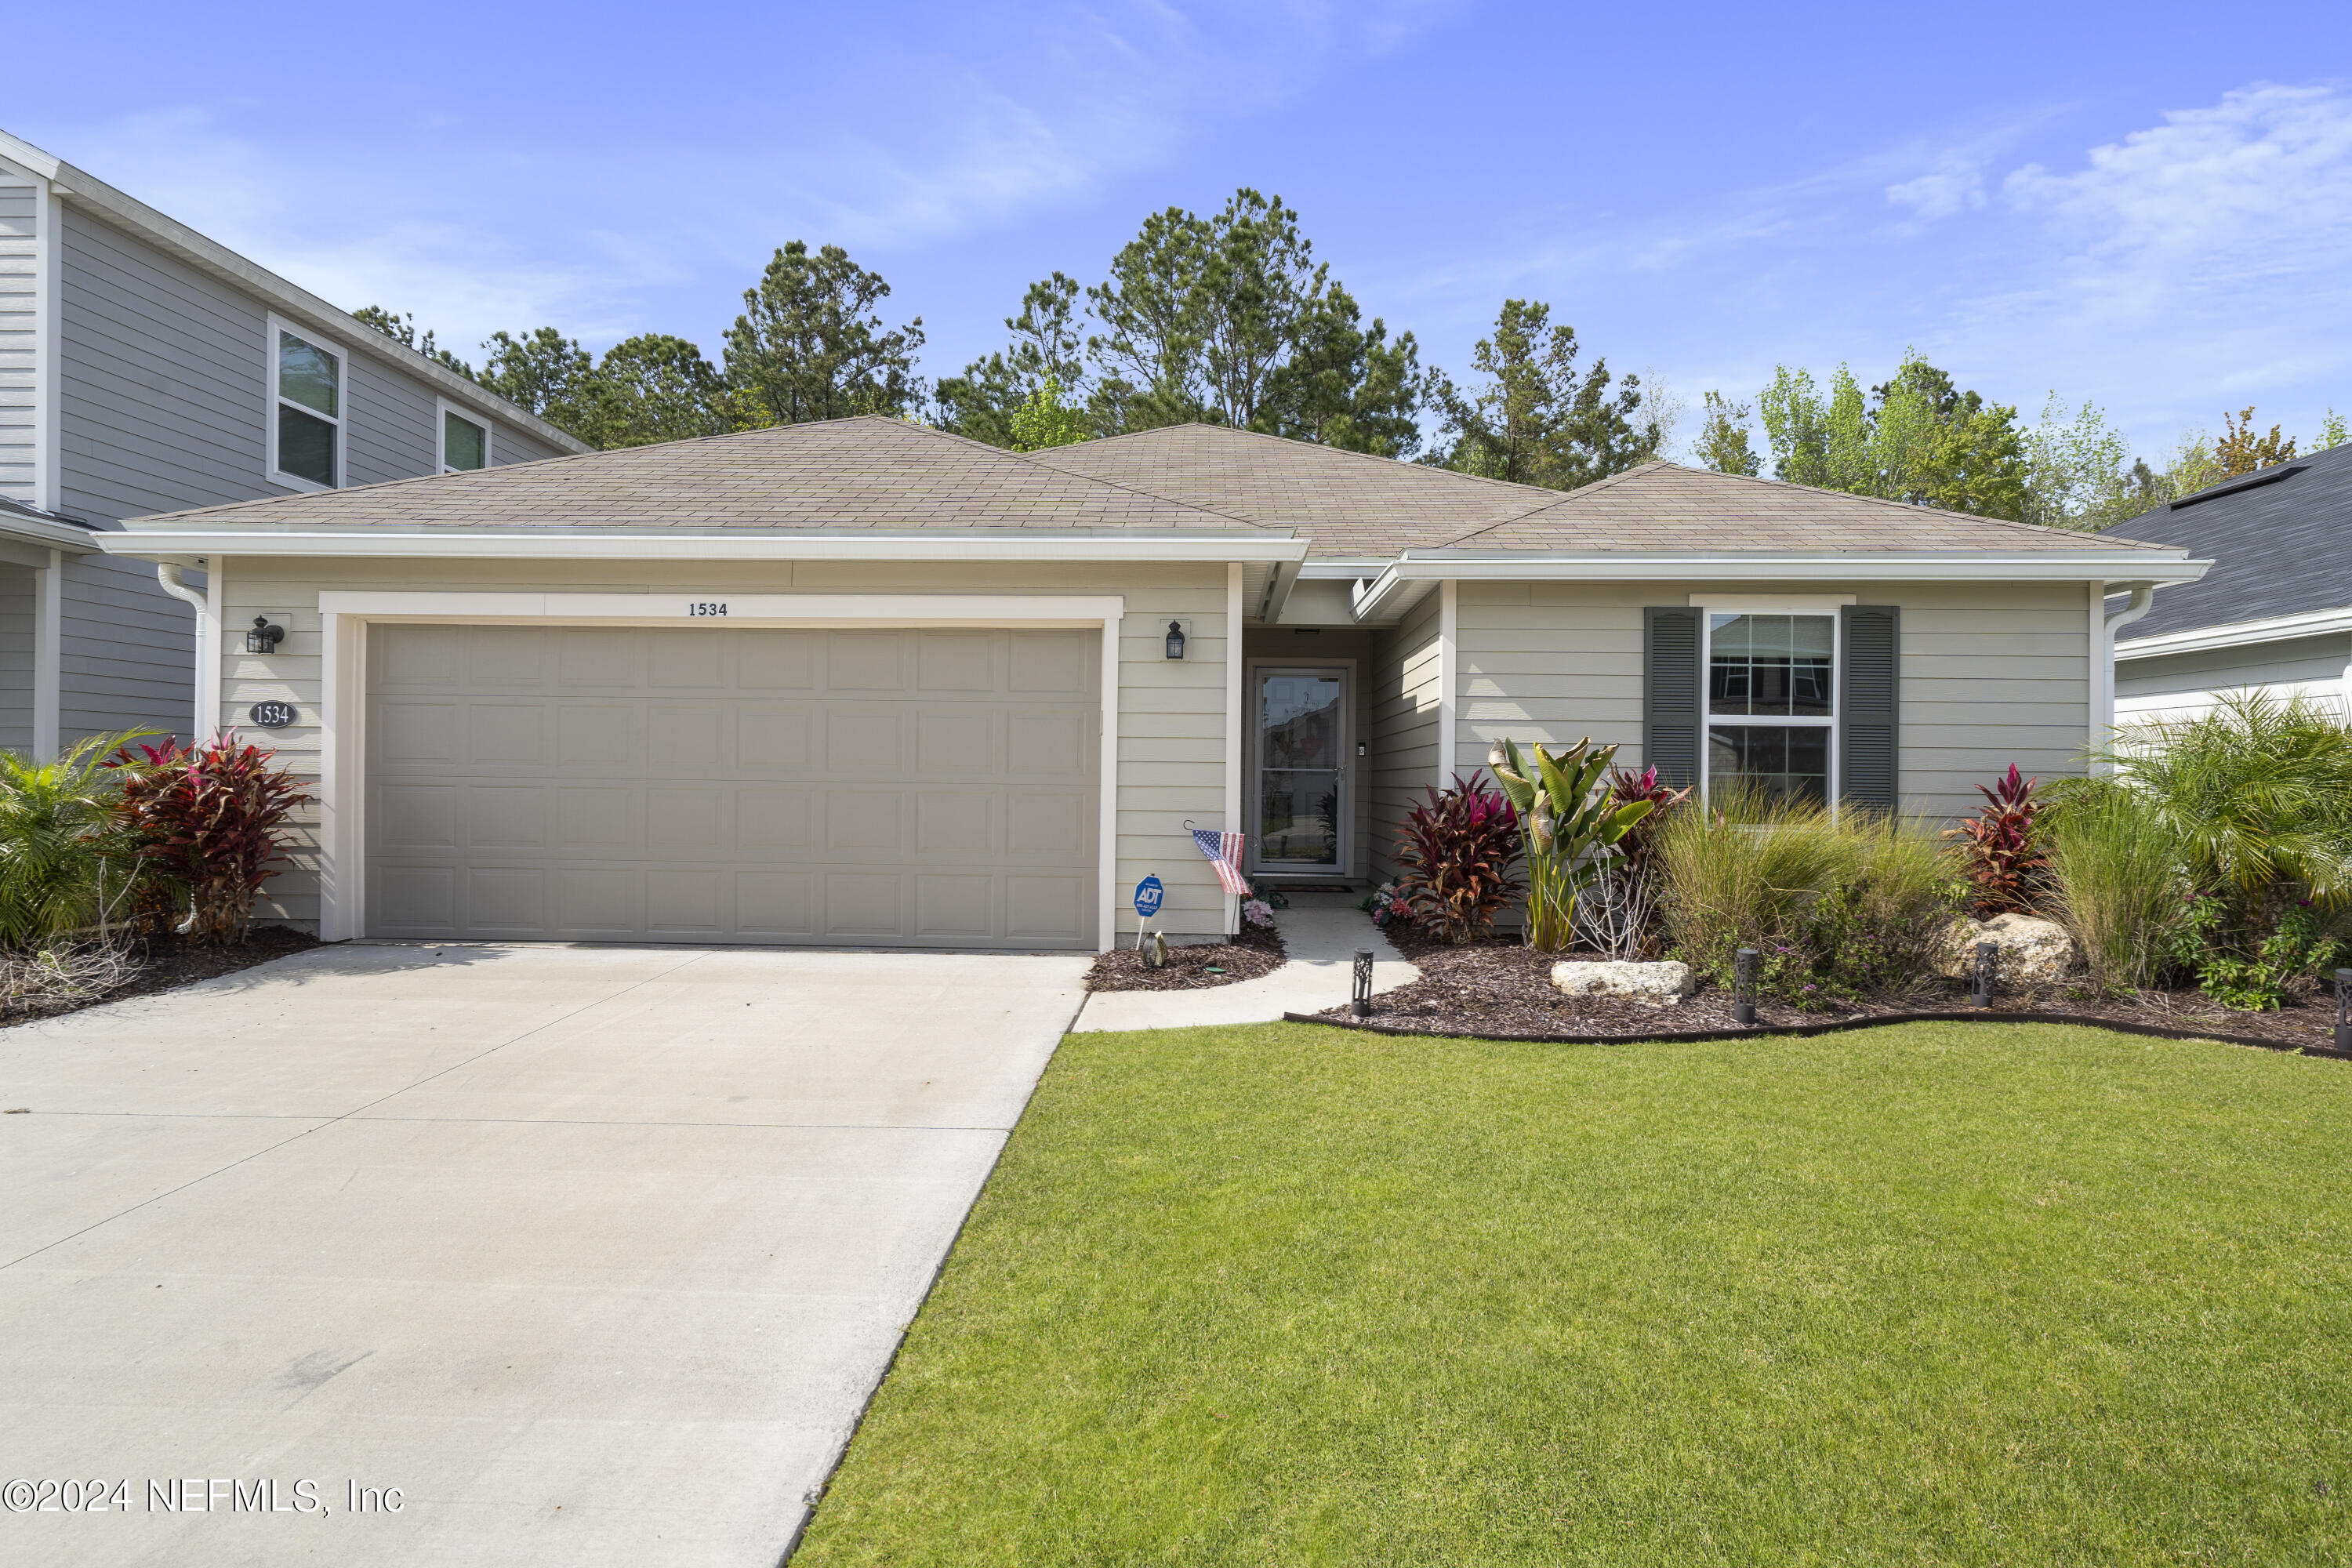 Jacksonville, FL home for sale located at 1534 Tanoan Drive, Jacksonville, FL 32221